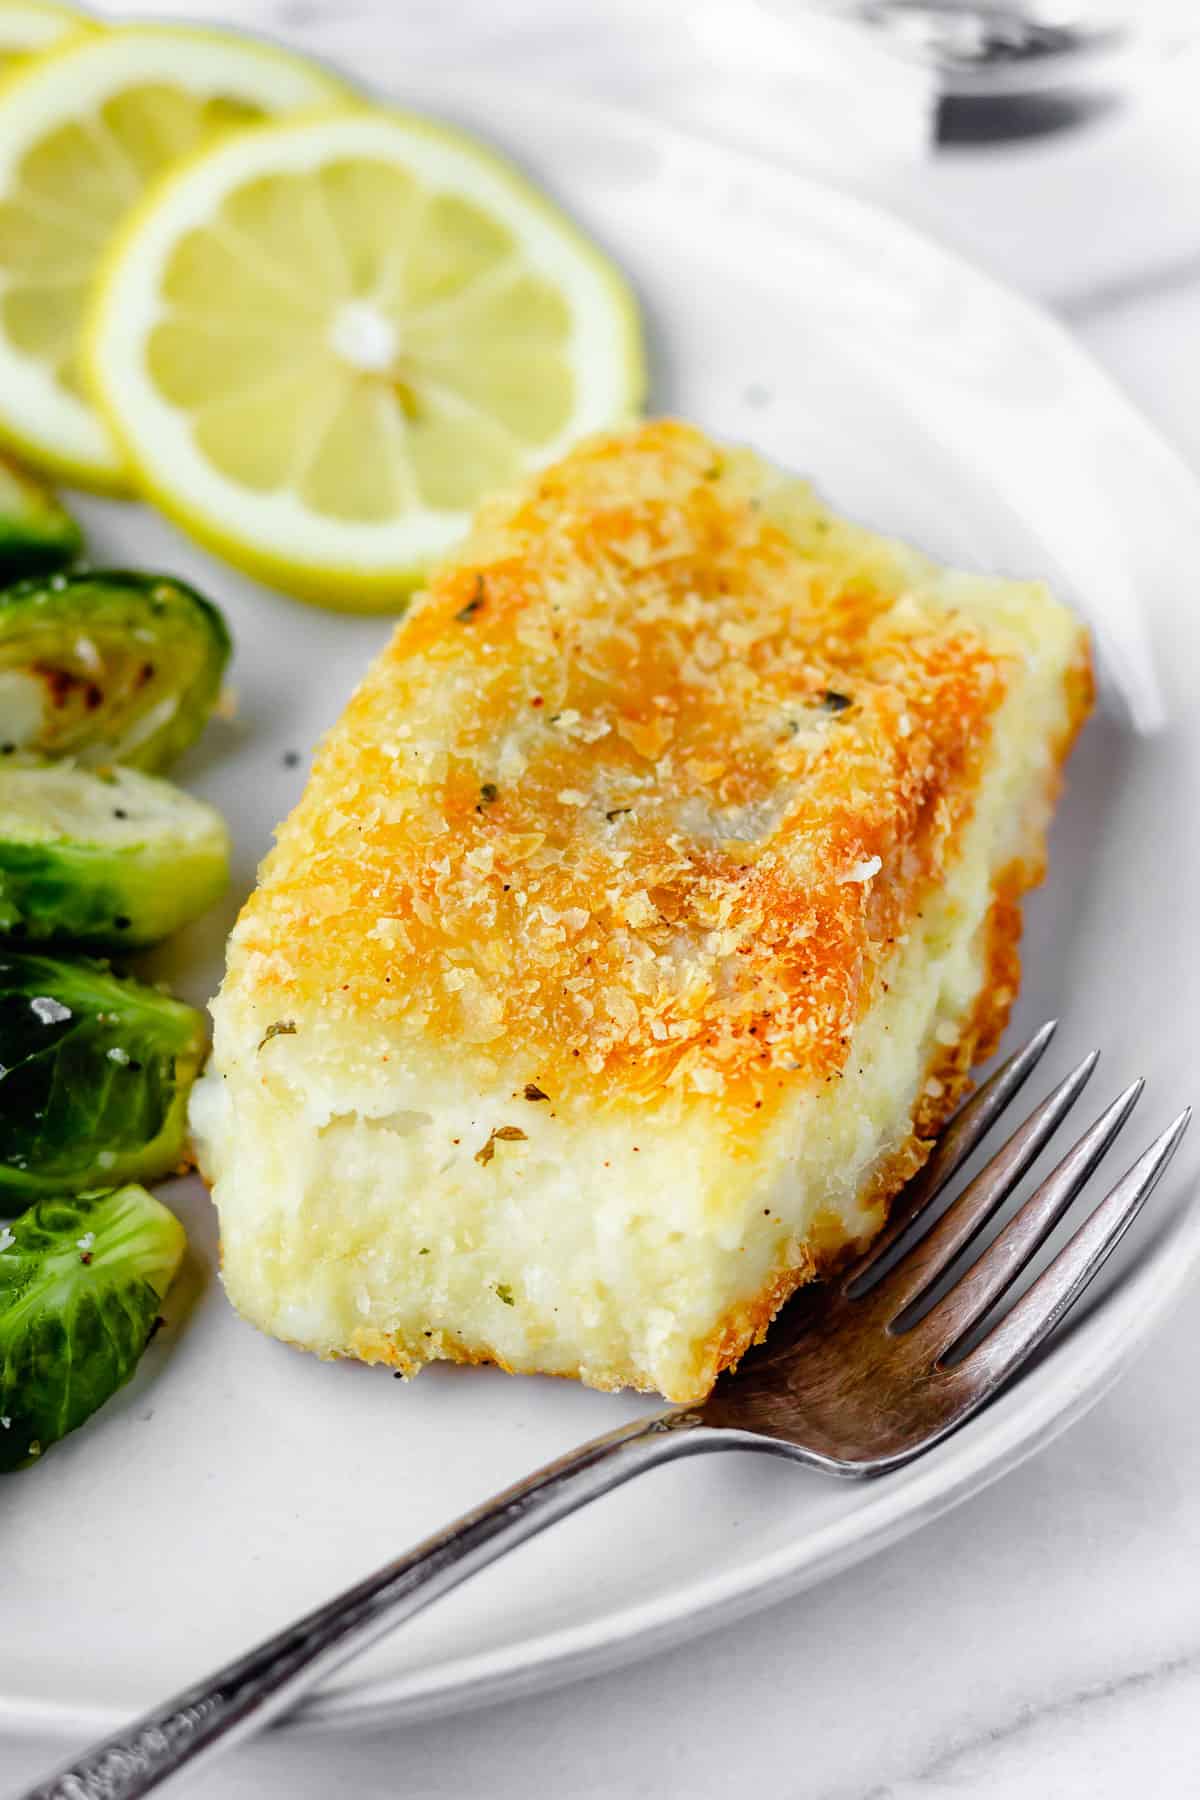 Potato crusted cod on a plate with a fork, brussels sprouts and slices of lemon partially slowing